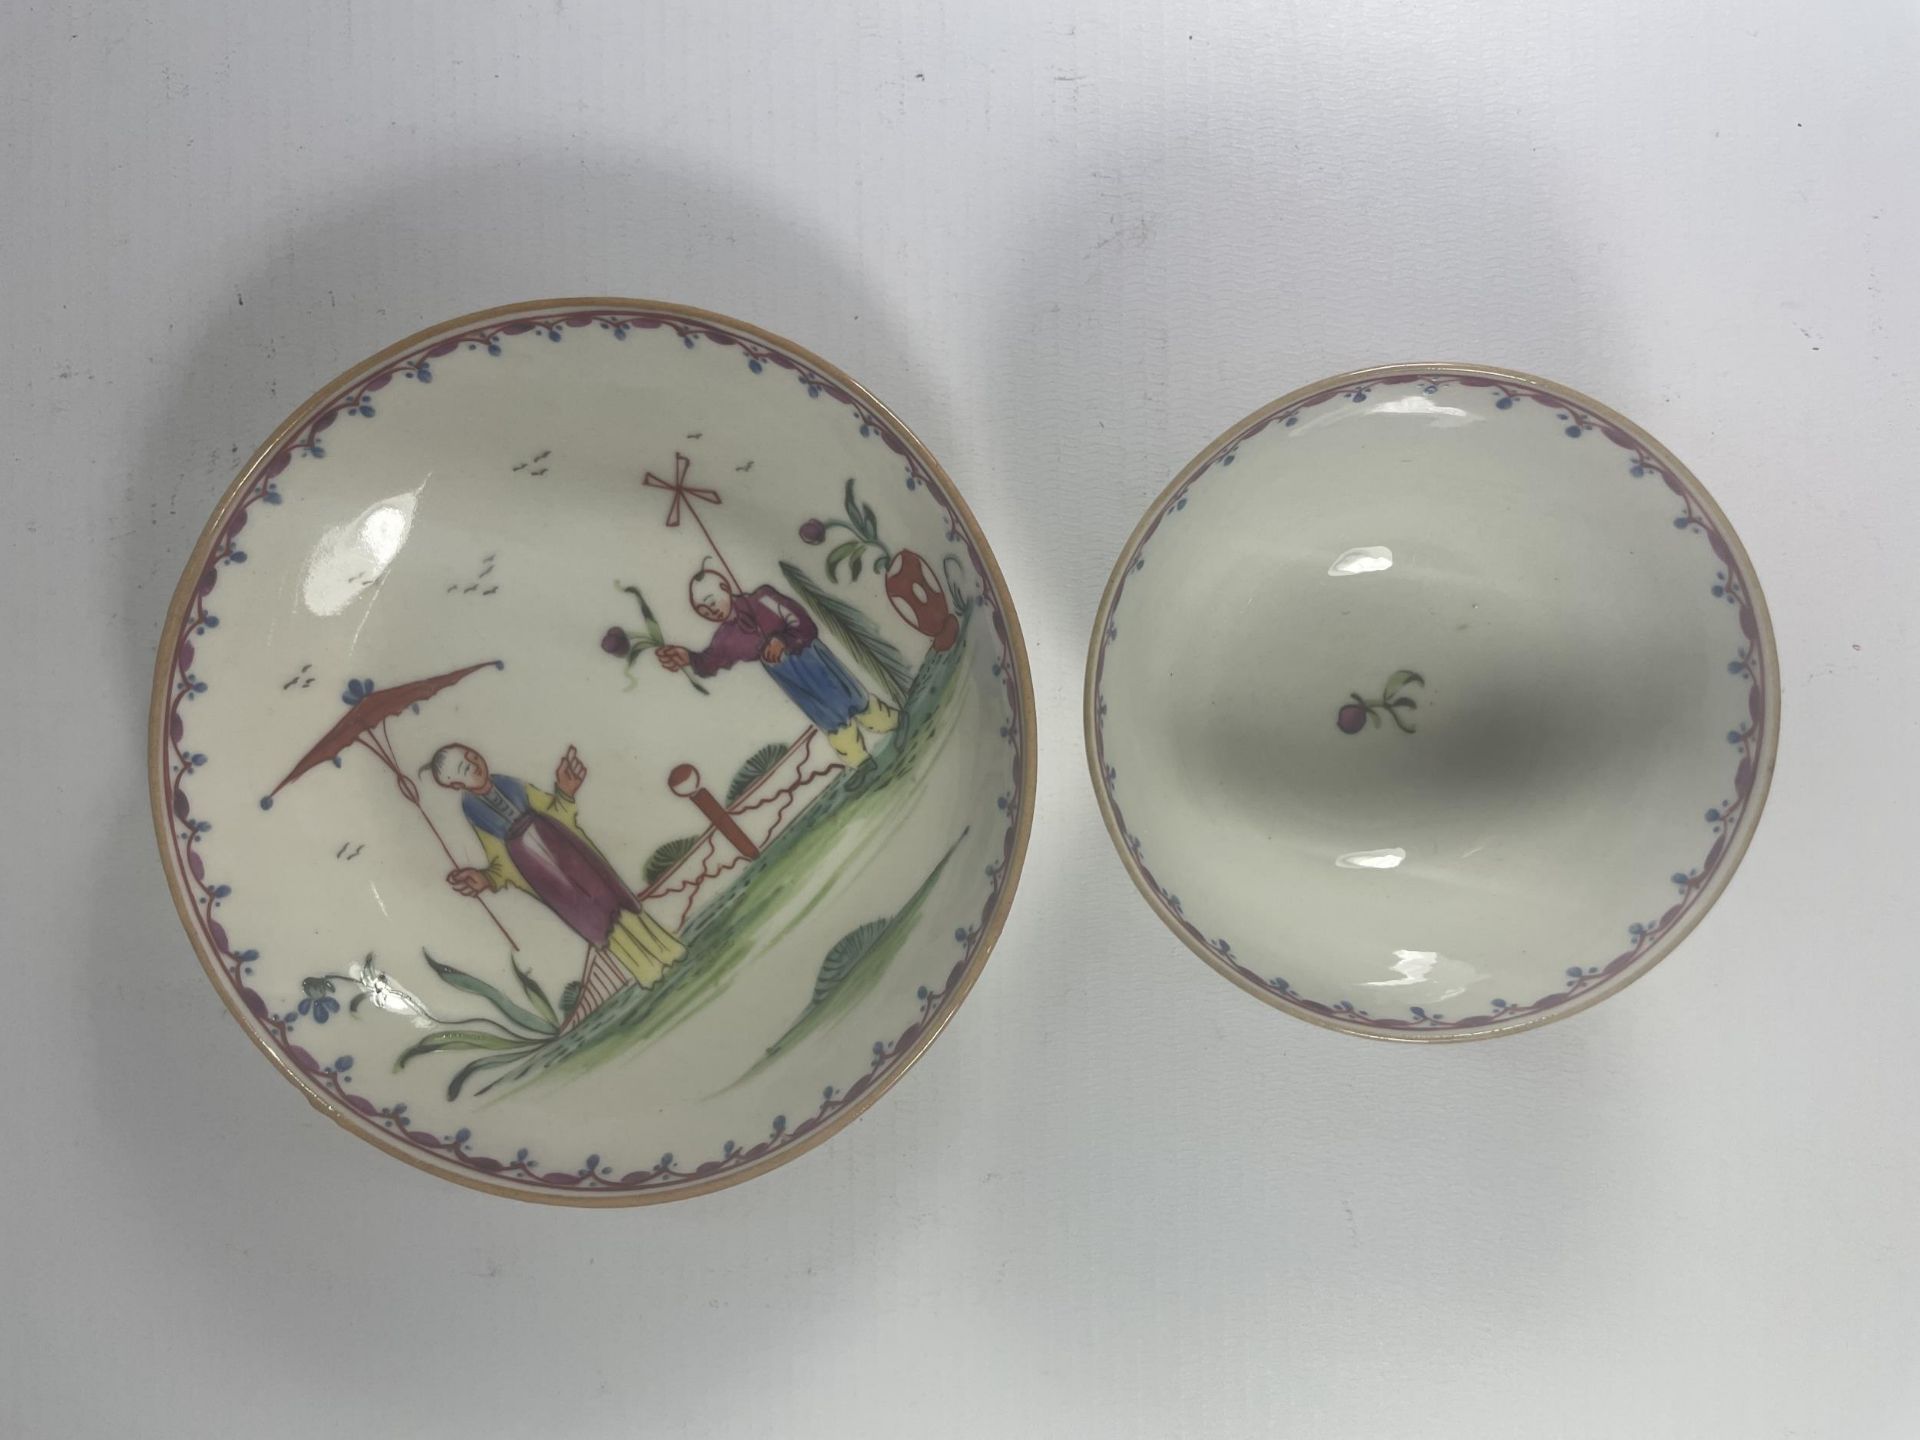 A 19TH CENTURY ENGLISH PORCELAIN TEA BOWL & SAUCER DEPICTING AN ORIENTAL SCENE - Image 3 of 4